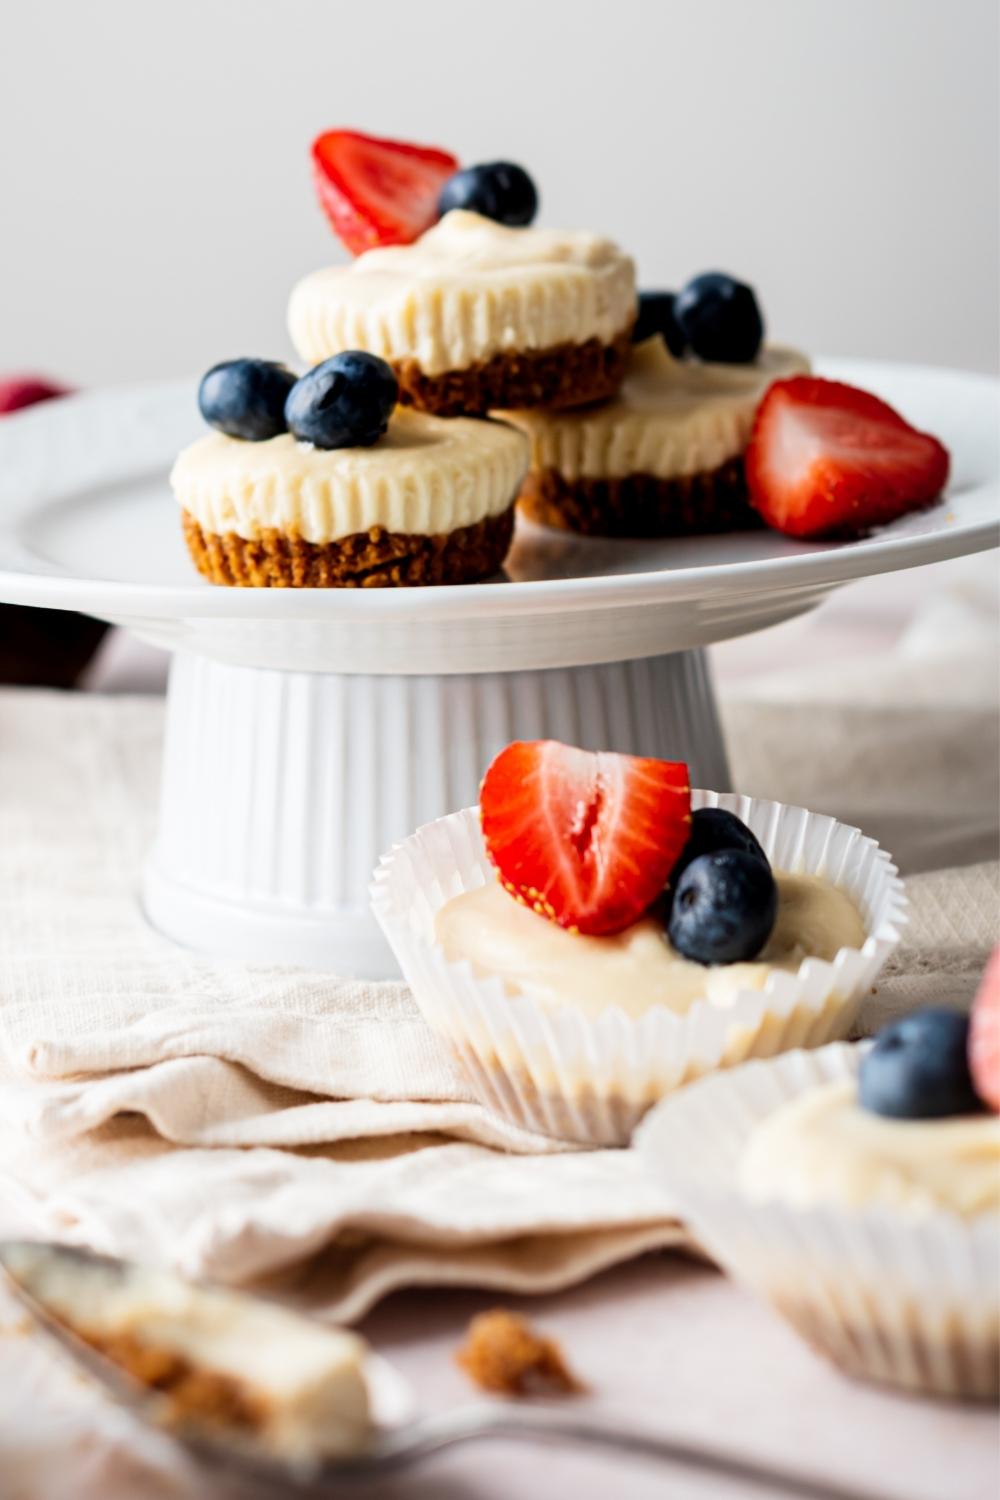 A cake stand with homemade mini cheesecake bites topped with berries. More mini cheesecake bites sit on the countertop in front of the cake stand. A spoon sits in front of those with a scoop of cheesecake in it.